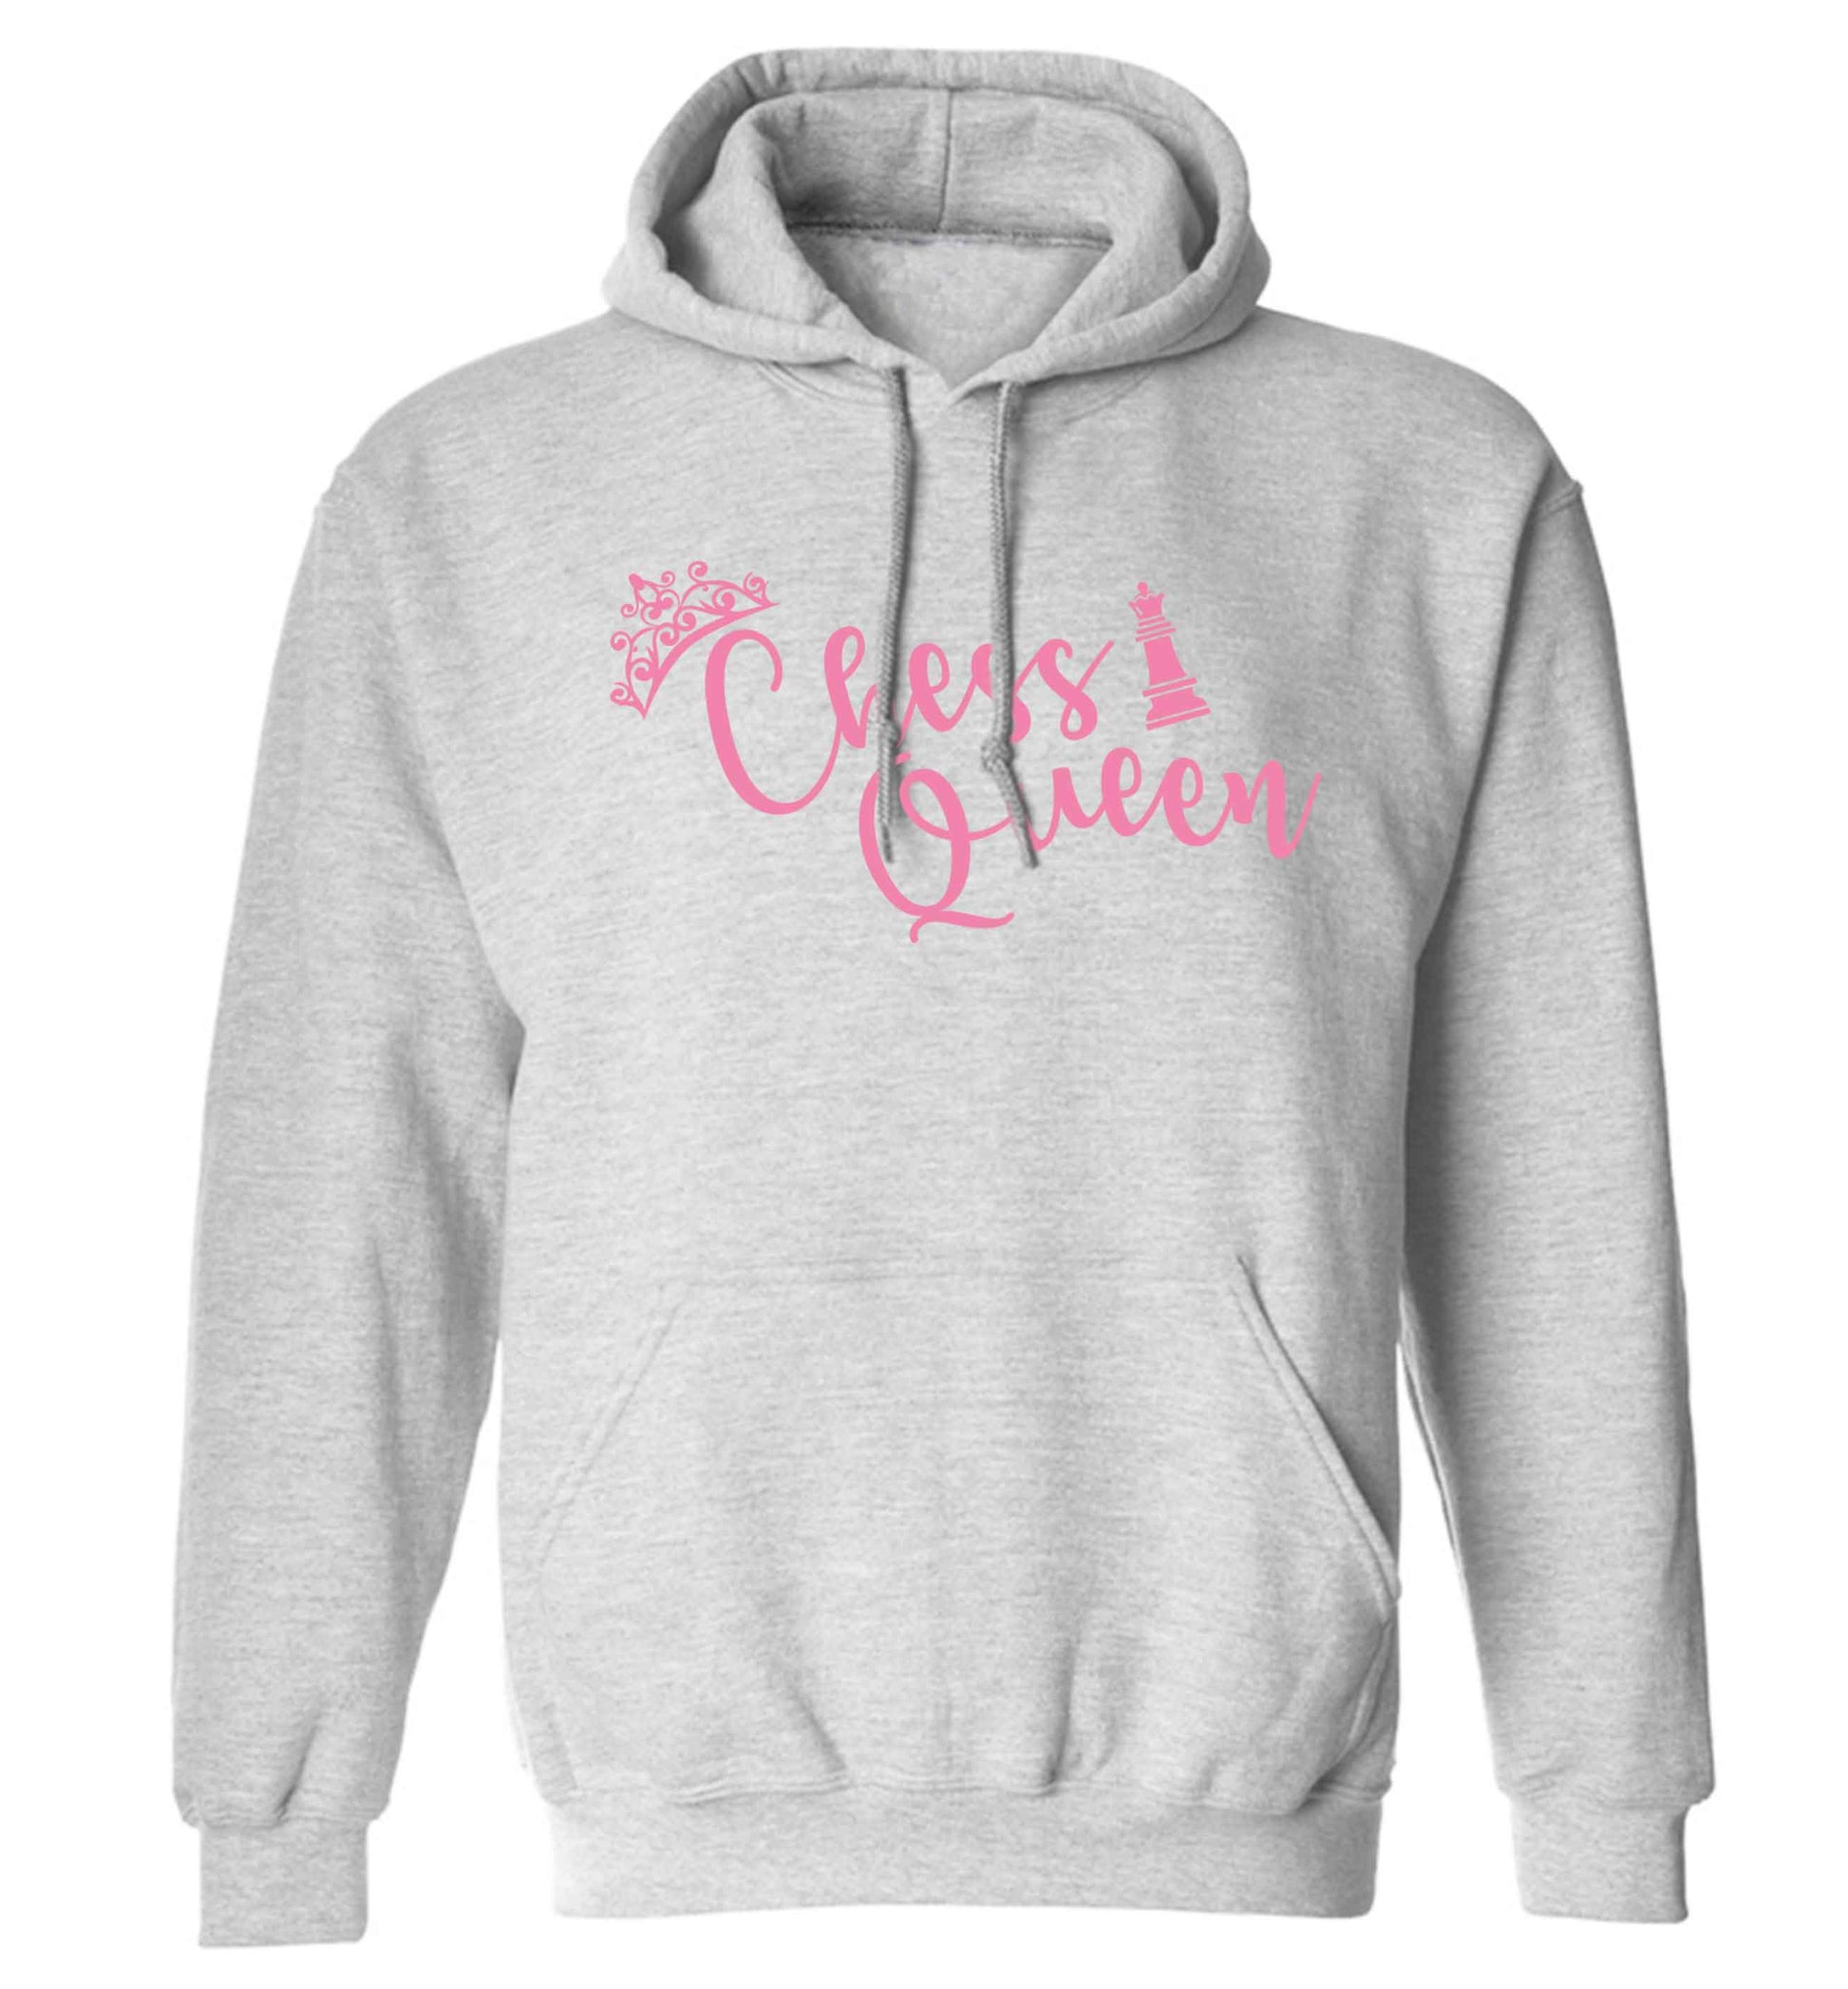 Pink chess queen  adults unisex grey hoodie 2XL